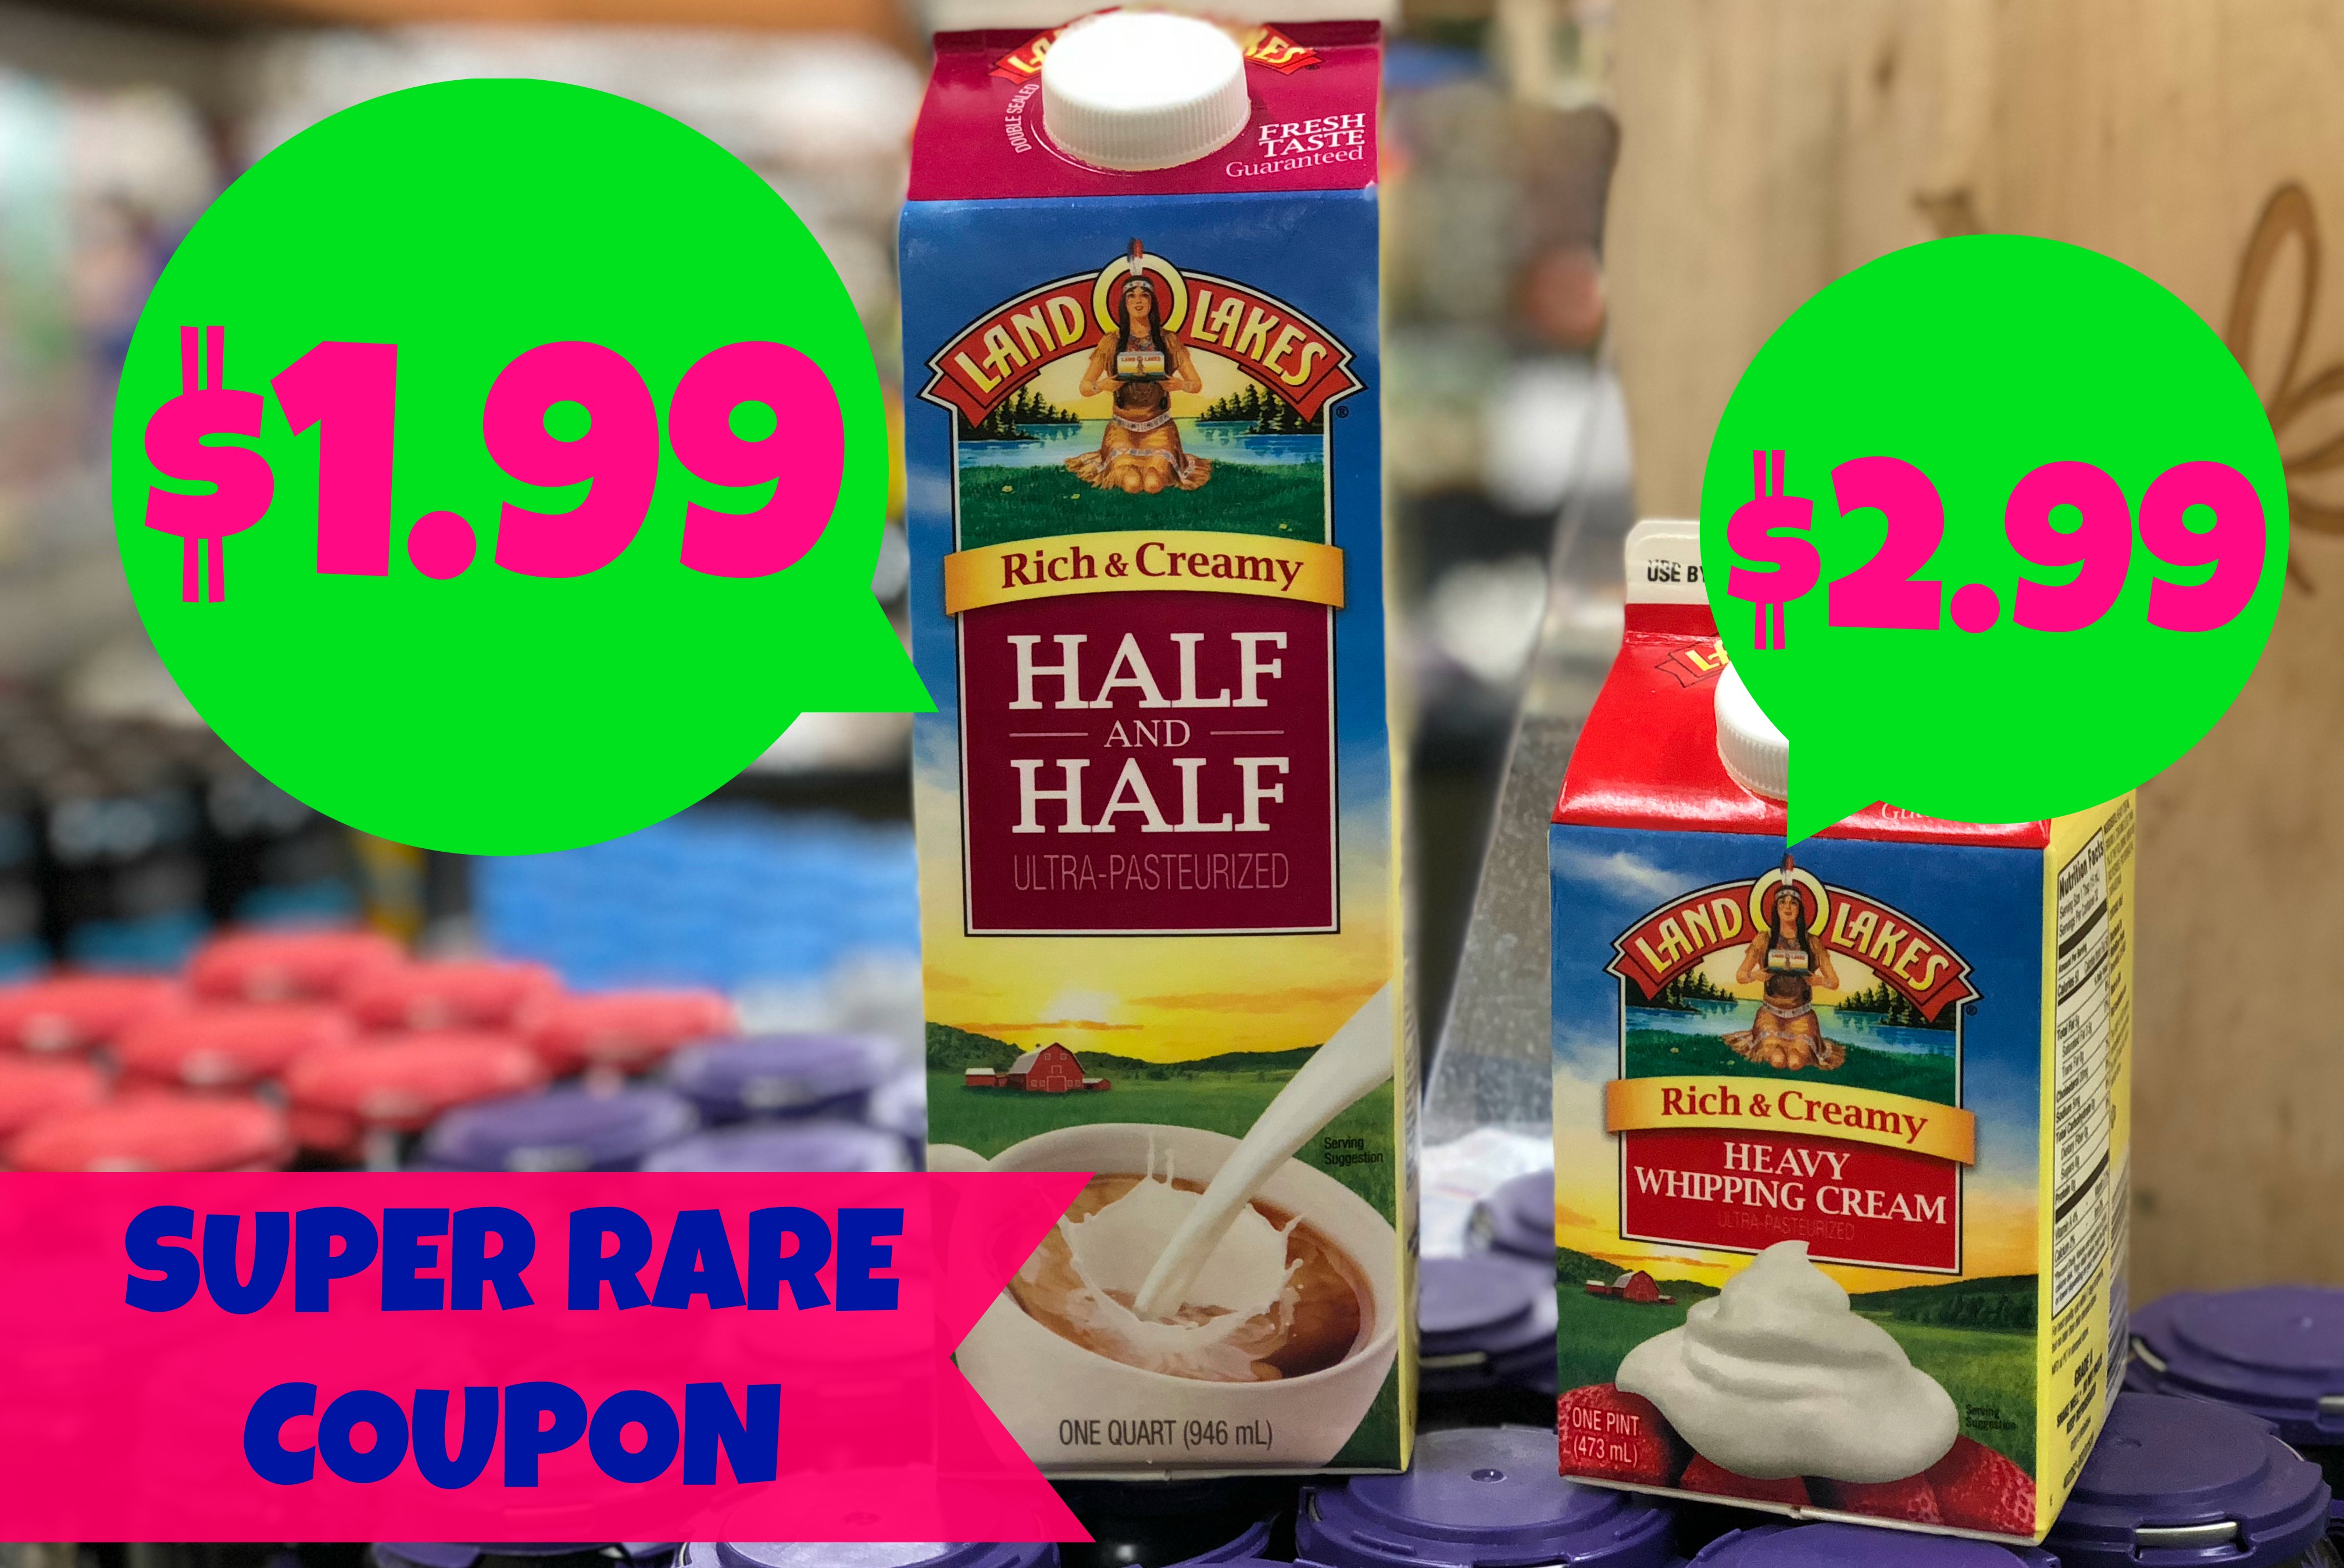 Rare Coupon Land O Lakes Half Half Only 1 99 With Kroger Mega Event Heavy Whipping Cream 2 99 Kroger Krazy